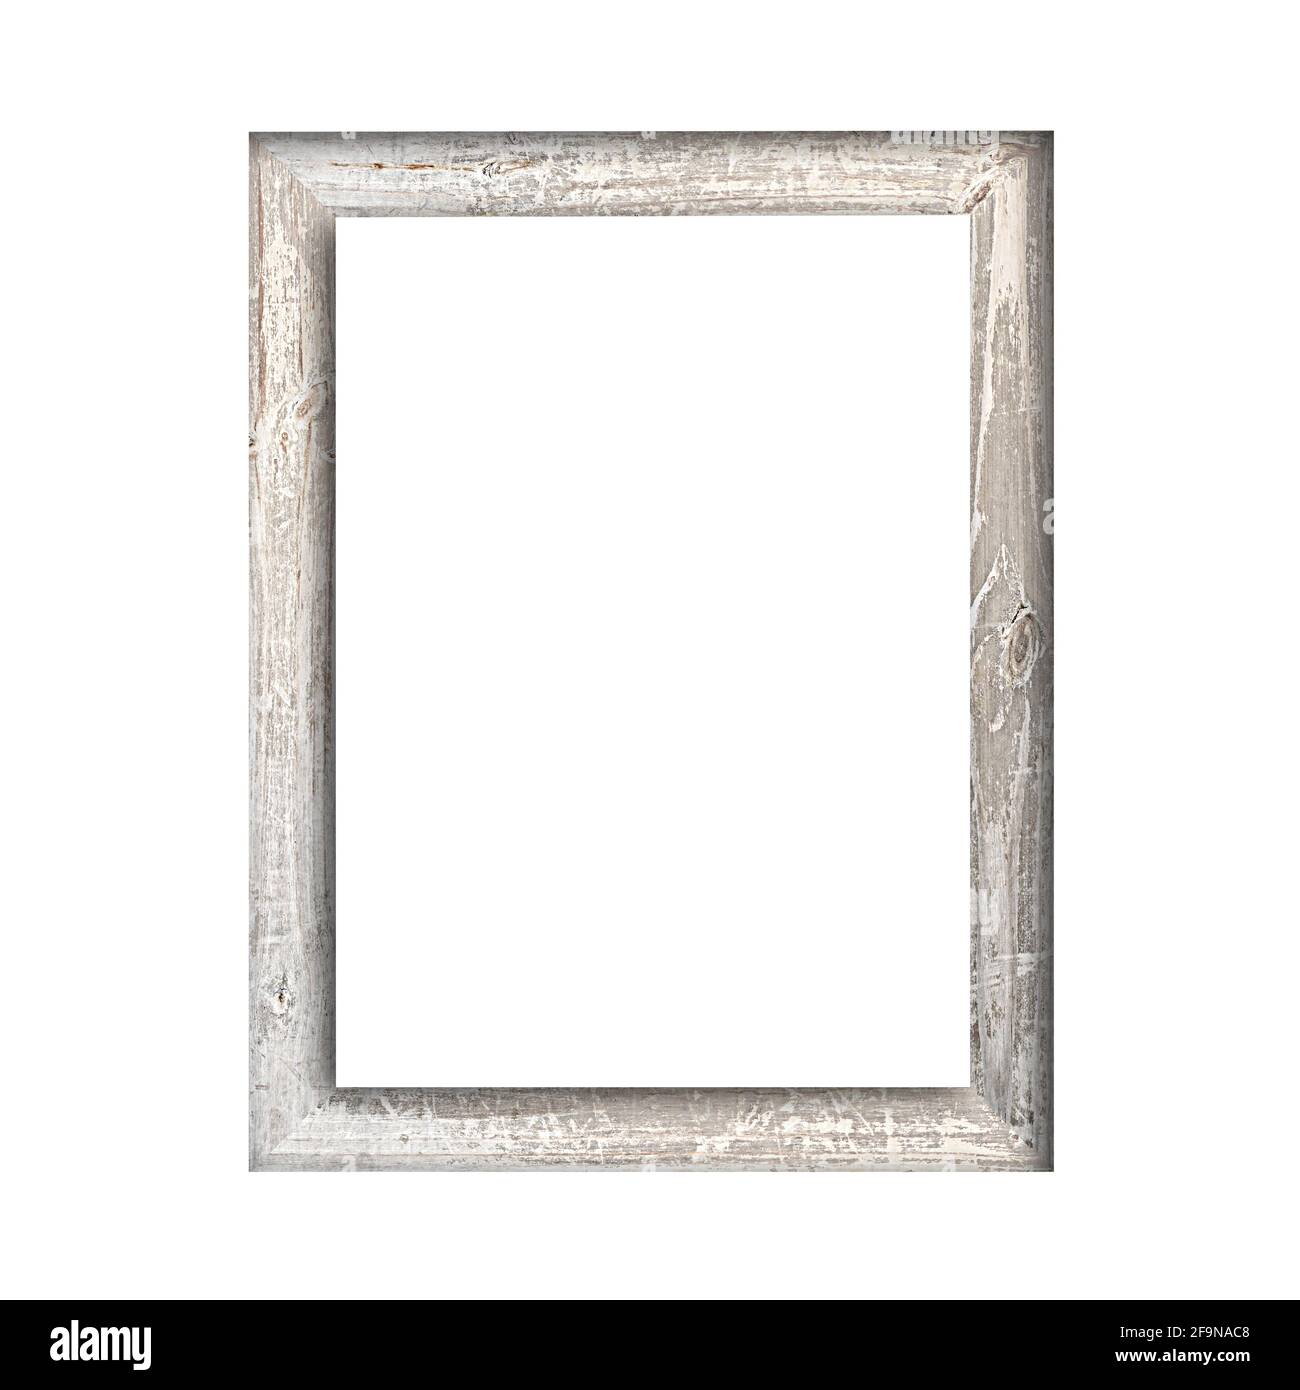 https://c8.alamy.com/comp/2F9NAC8/old-wooden-picture-frame-isolated-on-white-background-2F9NAC8.jpg